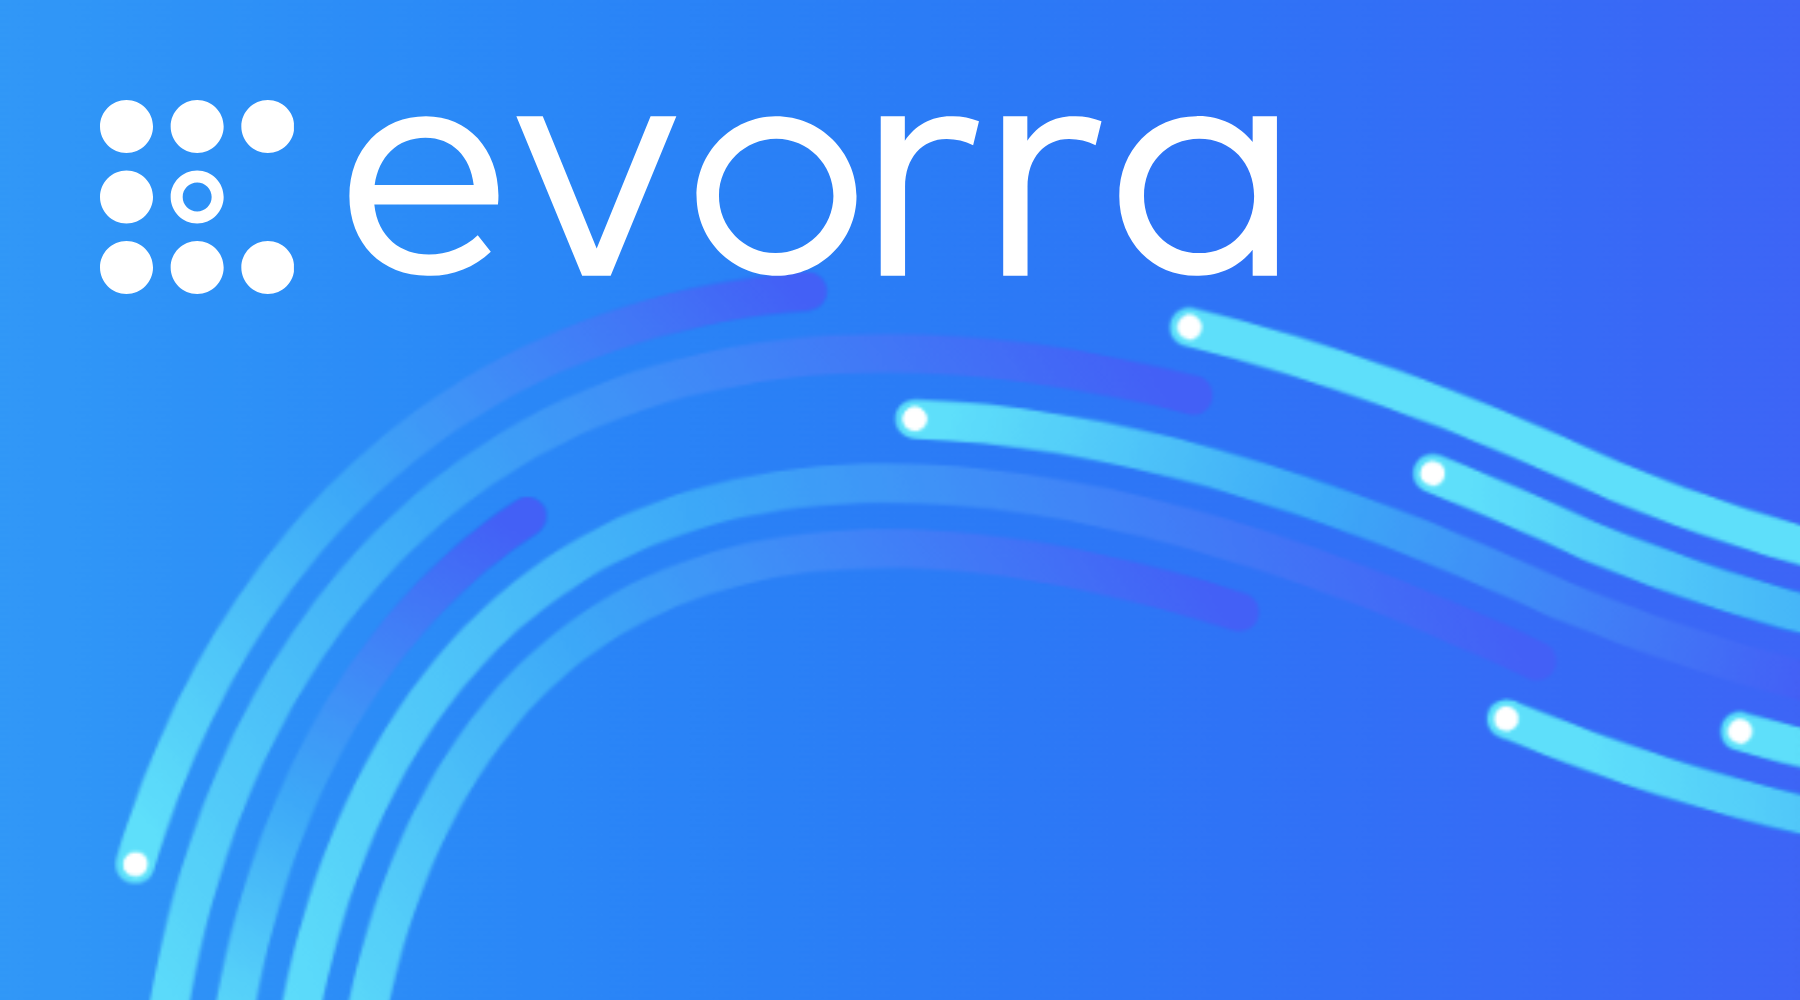 Evorra Secures An Additional $1M To Enable Responsible Data Marketing At Scale